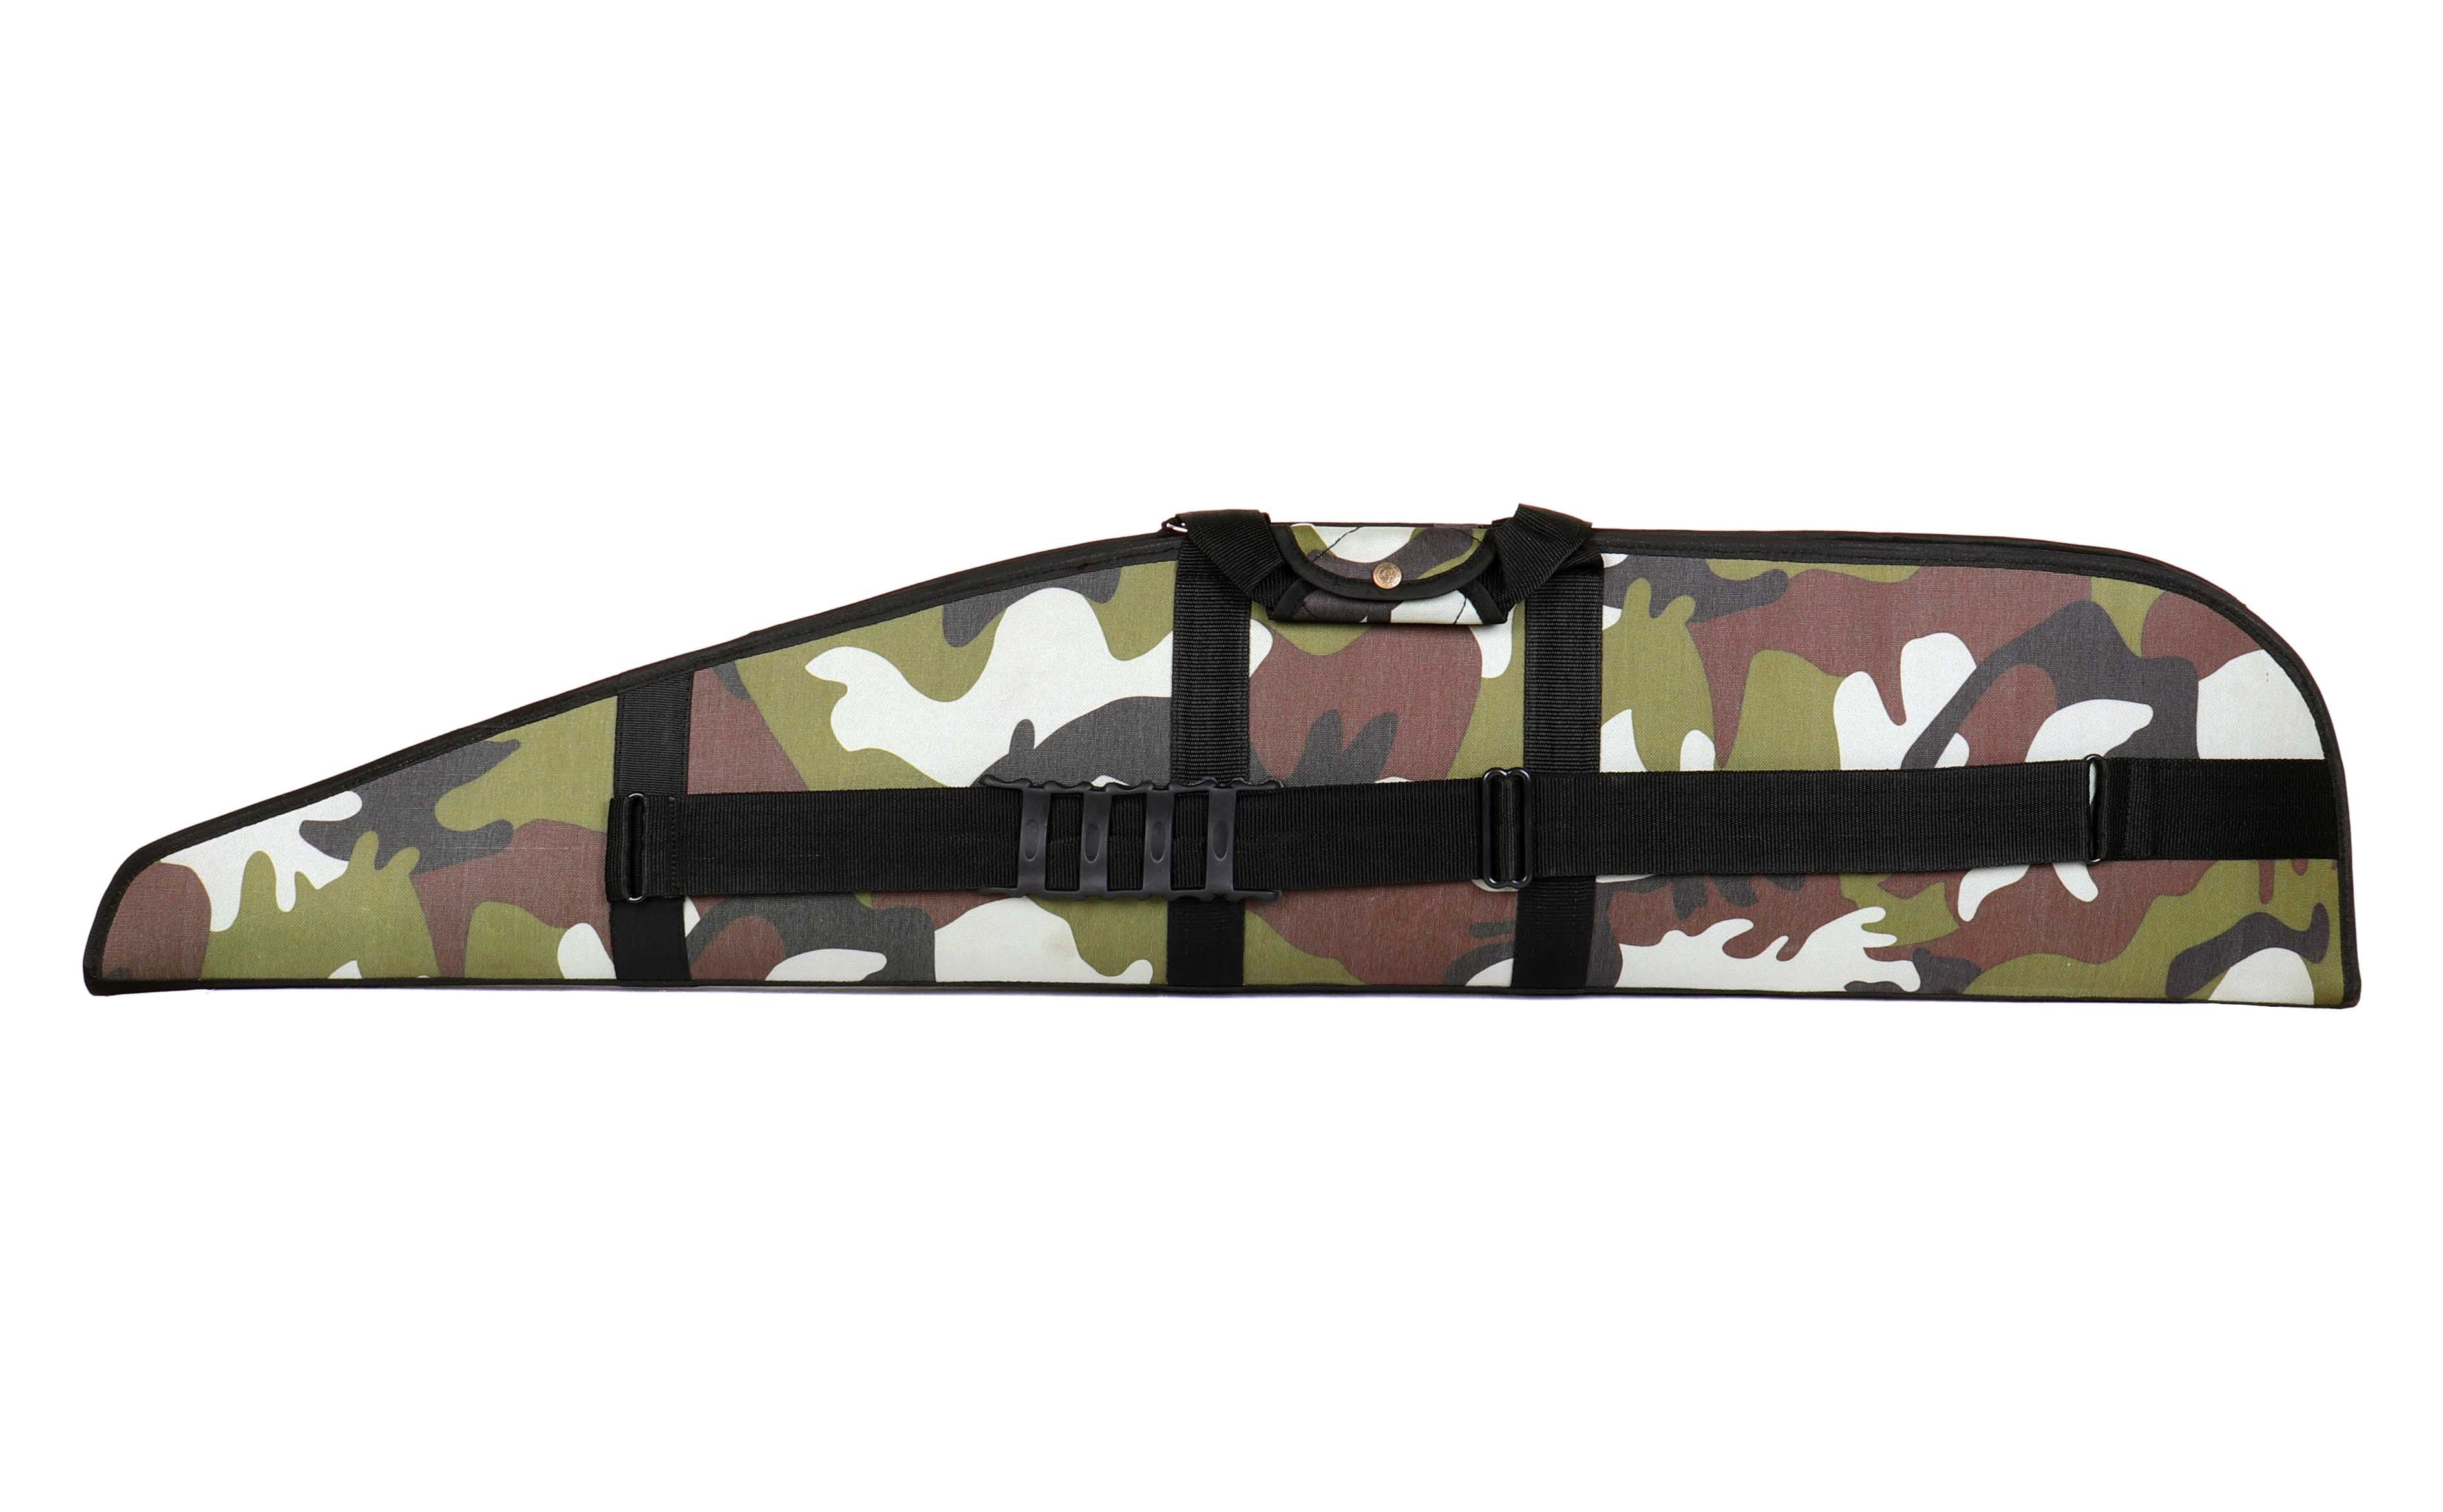 Rifle Hard Cover Wide - Cynosure Sports and Outdoors Pvt Ltd